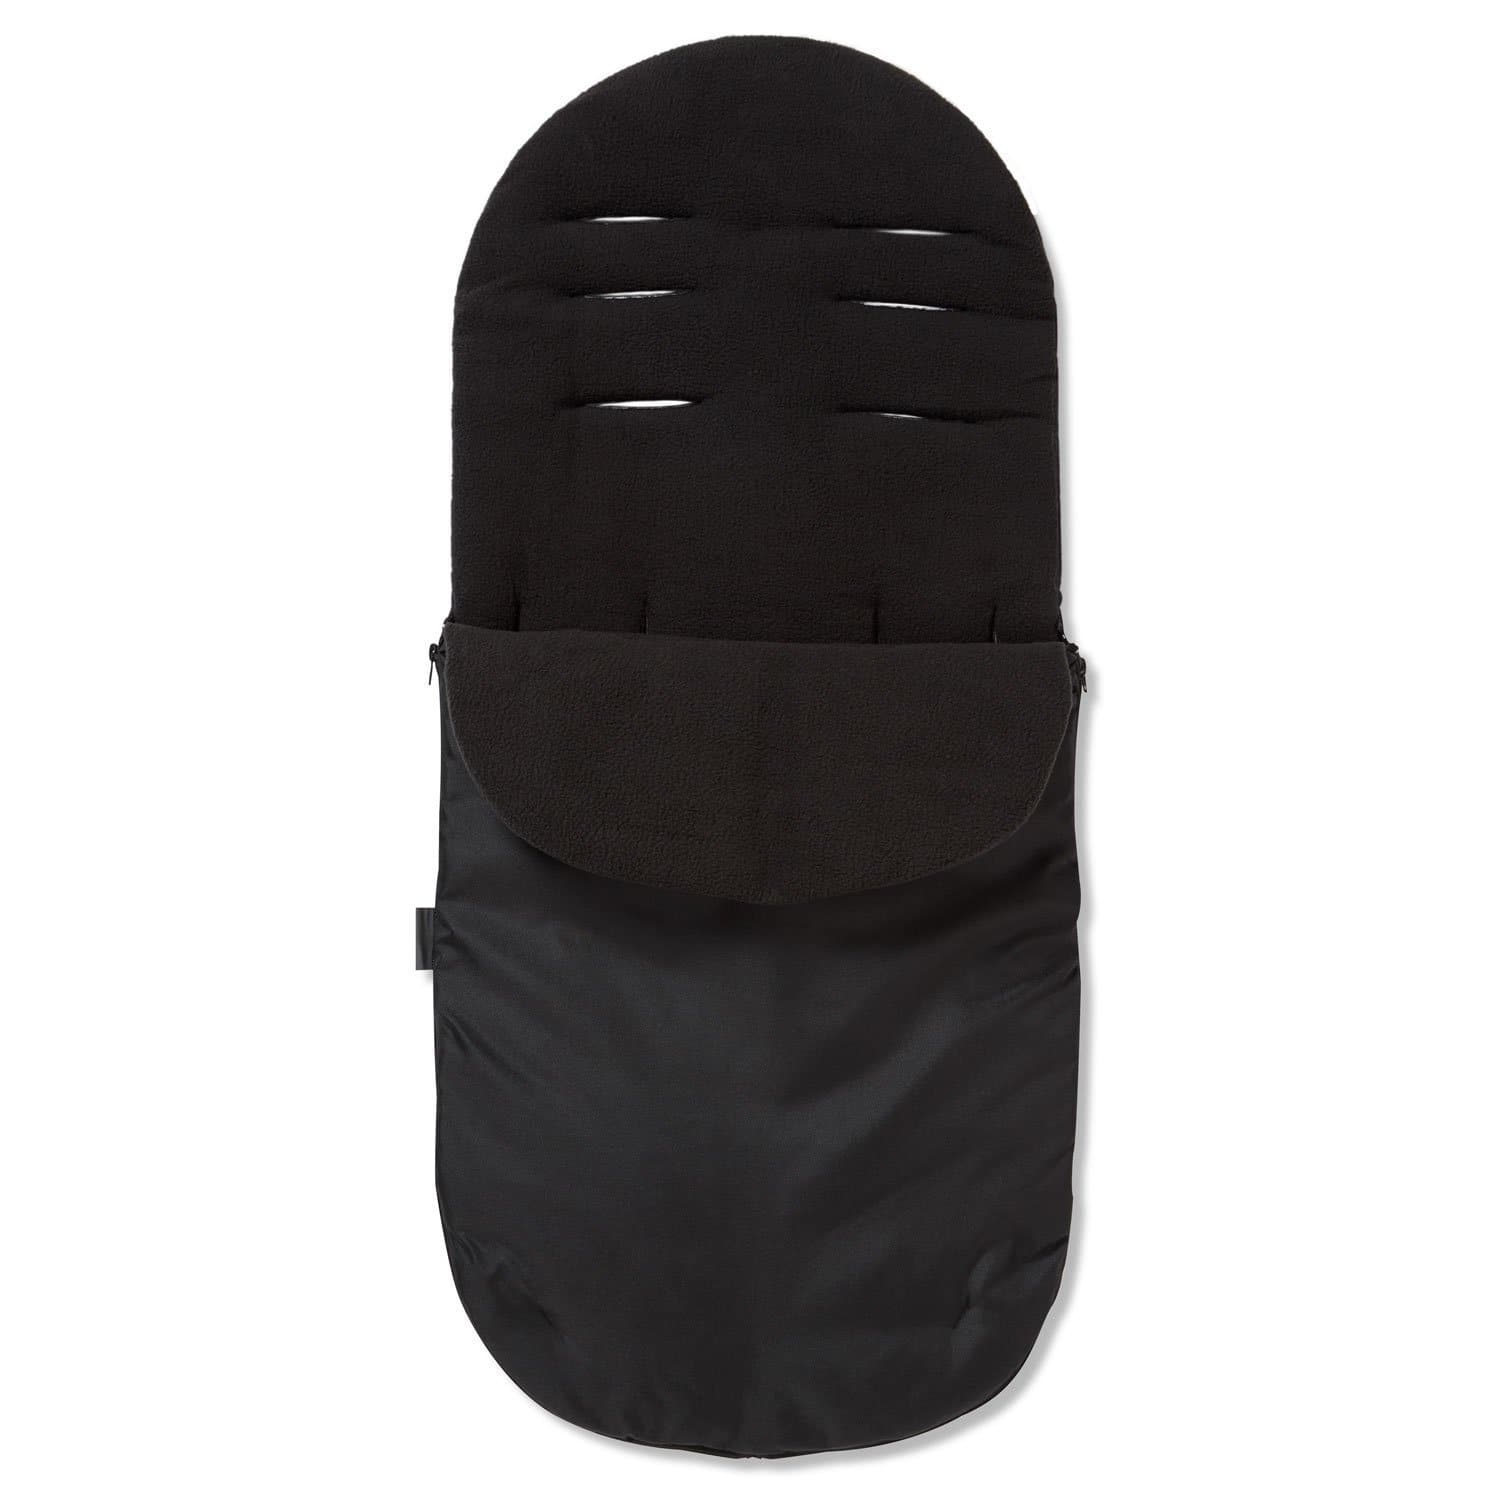 Footmuff / Cosy Toes Compatible with Valco - Black / Fits All Models | For Your Little One